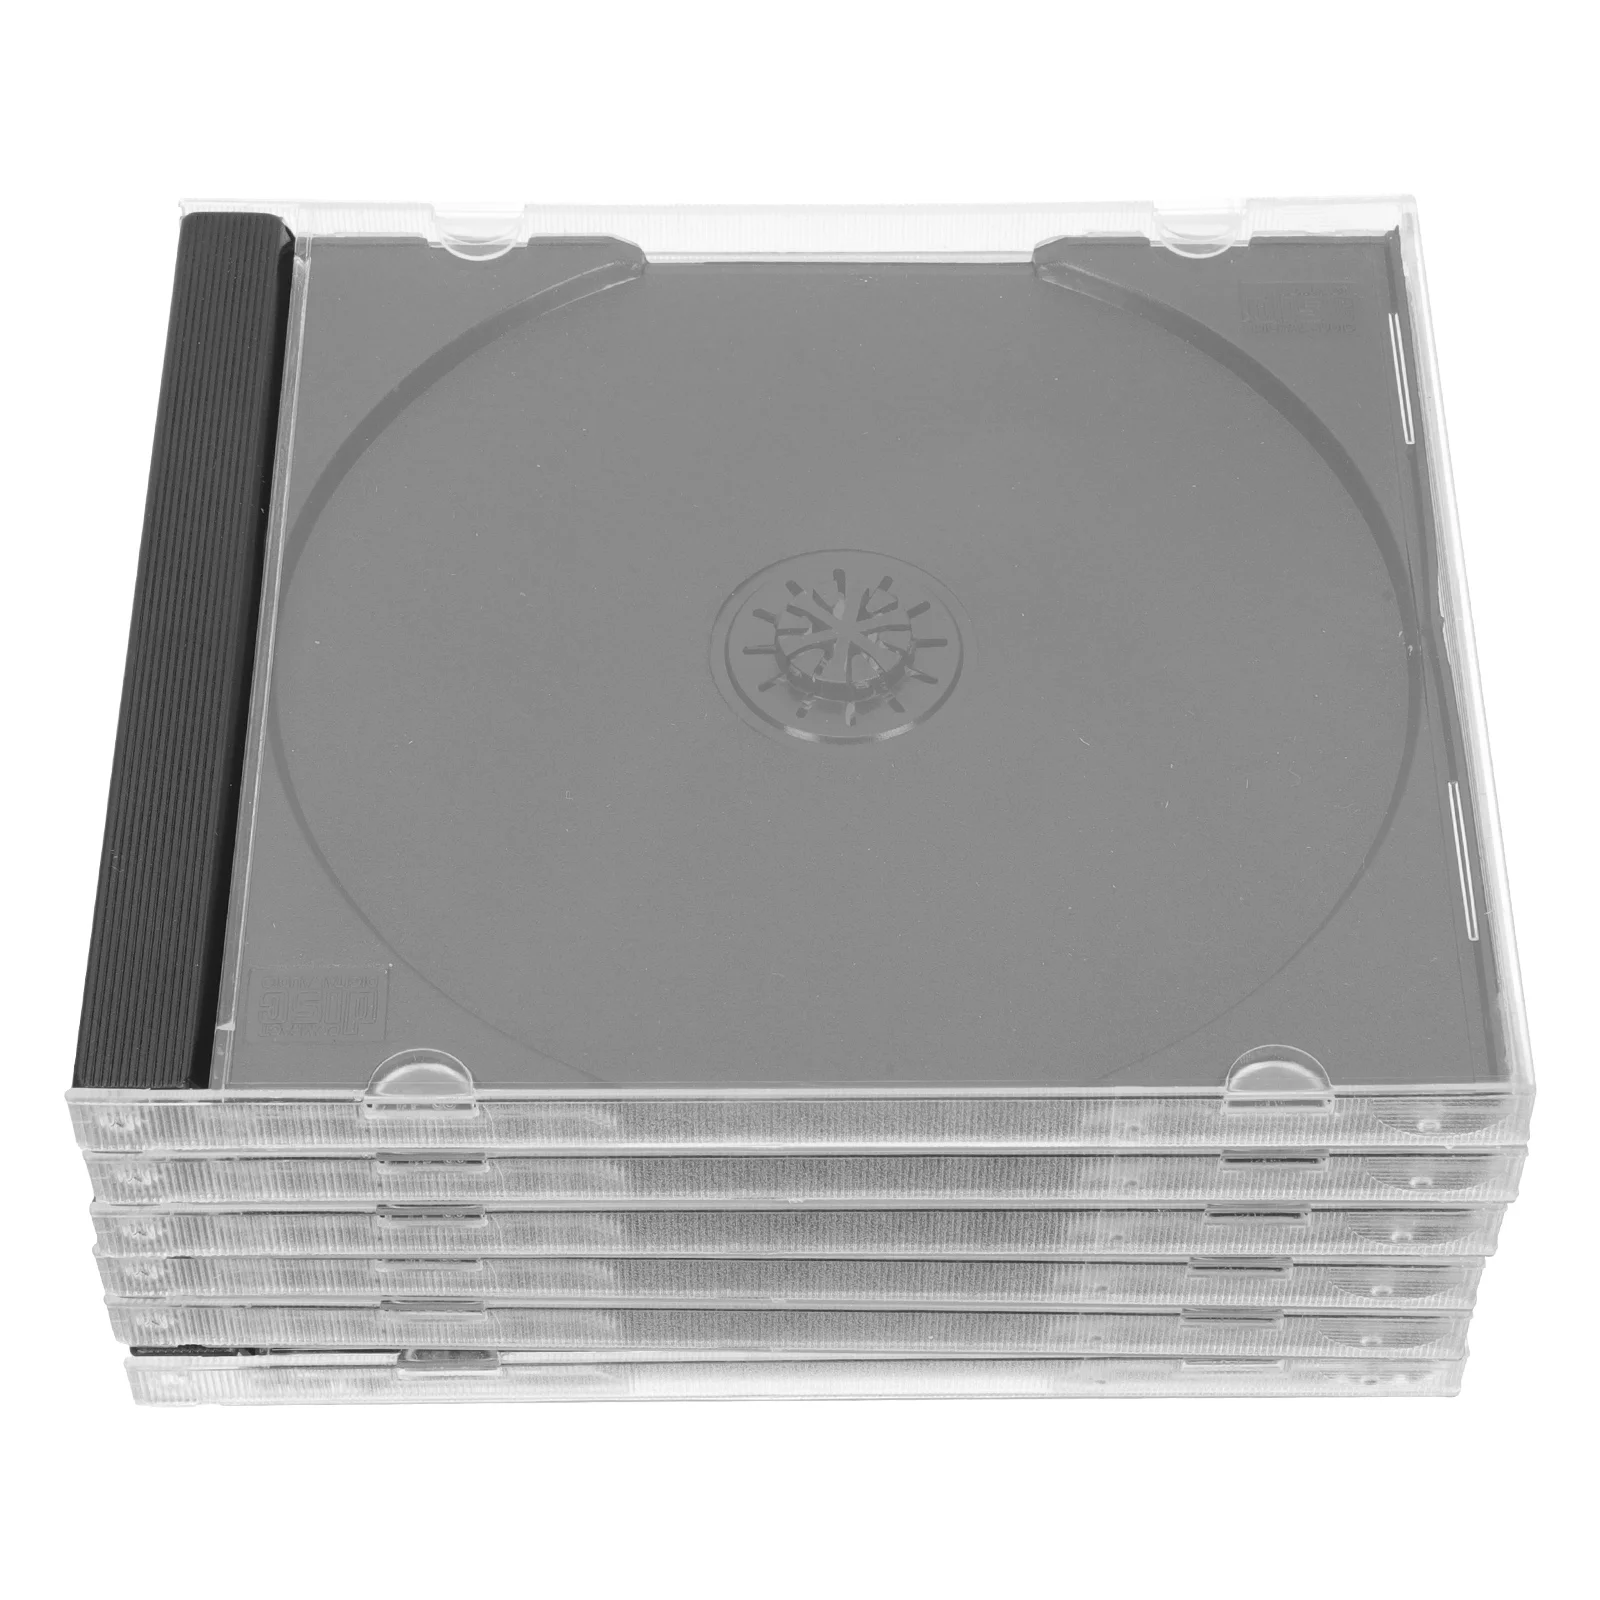 

Standard Single Jewel Case: 6pcs Clear Disc Storage Boxes Assembled Black Tray Portable Container for 5 50X4 83